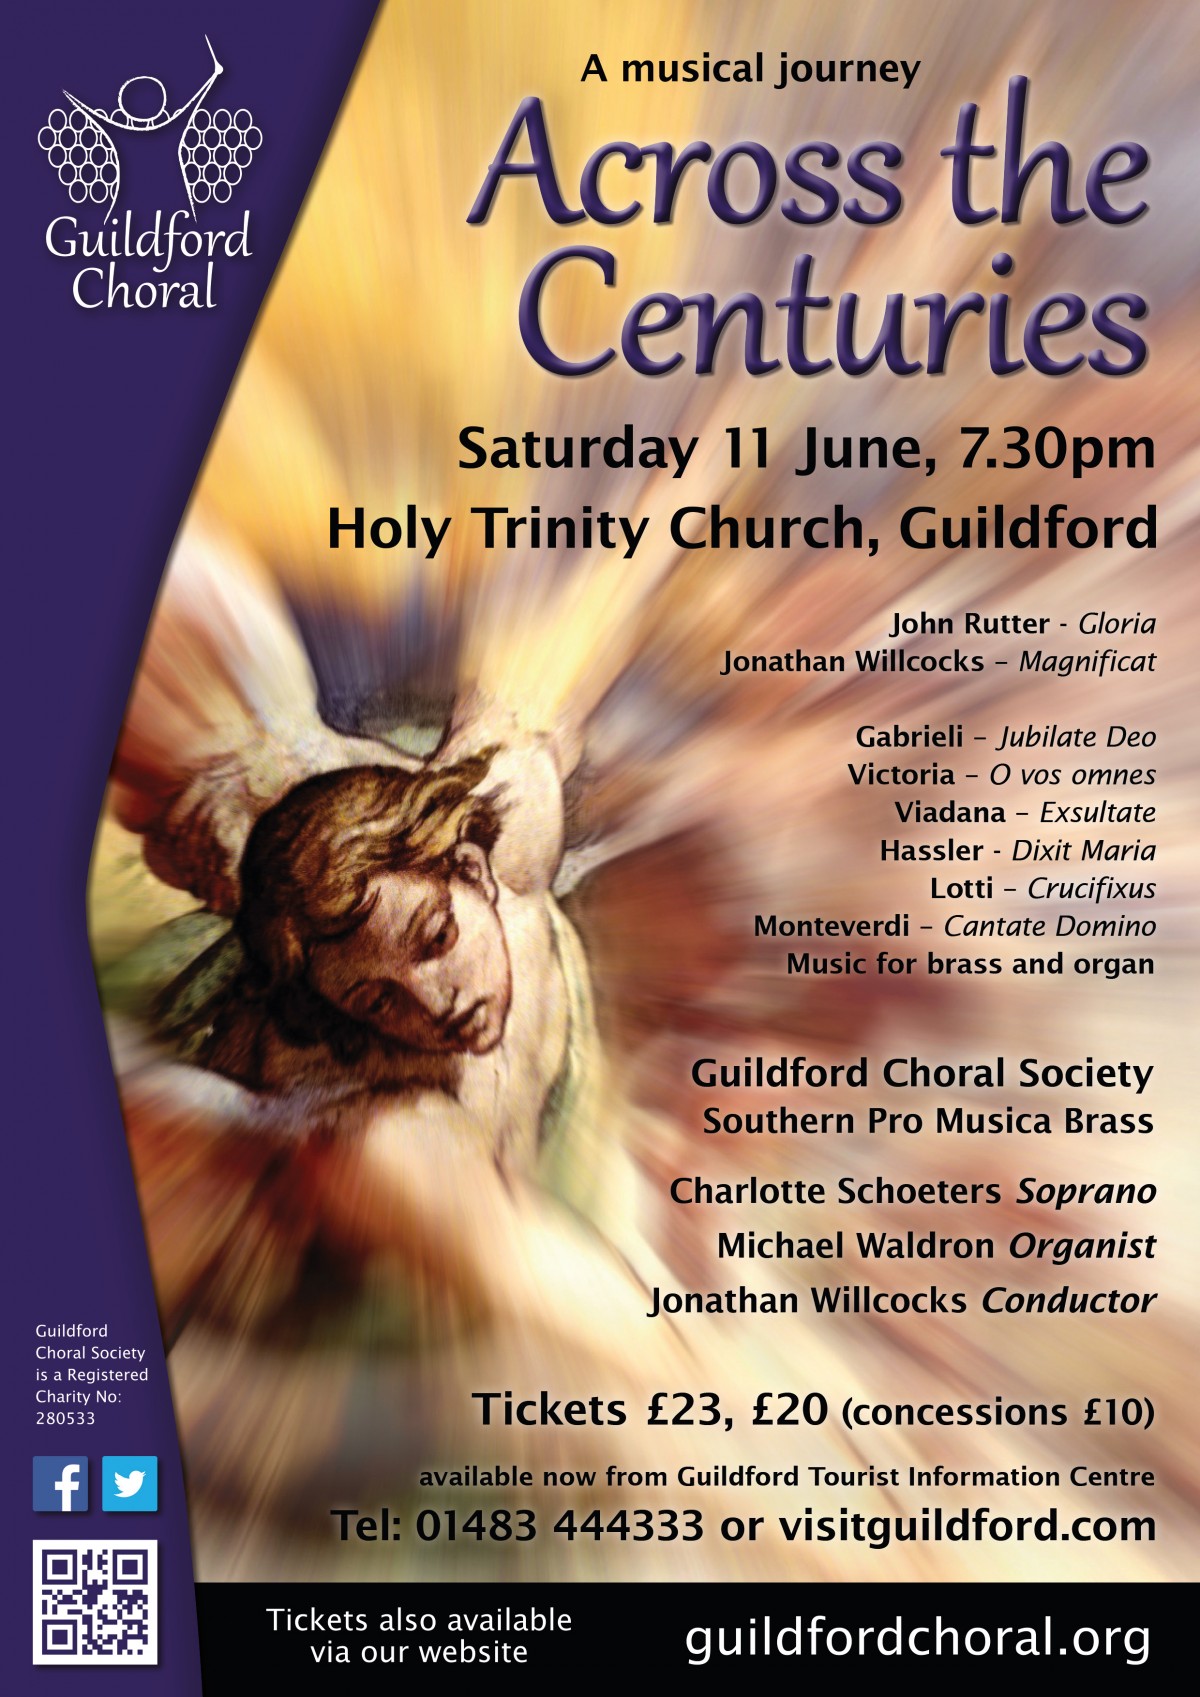 Music from "Across the centuries" with pieces from Montiverdi to John Rutter to Jonathan Willcocks. Click on the image to enlarge it.